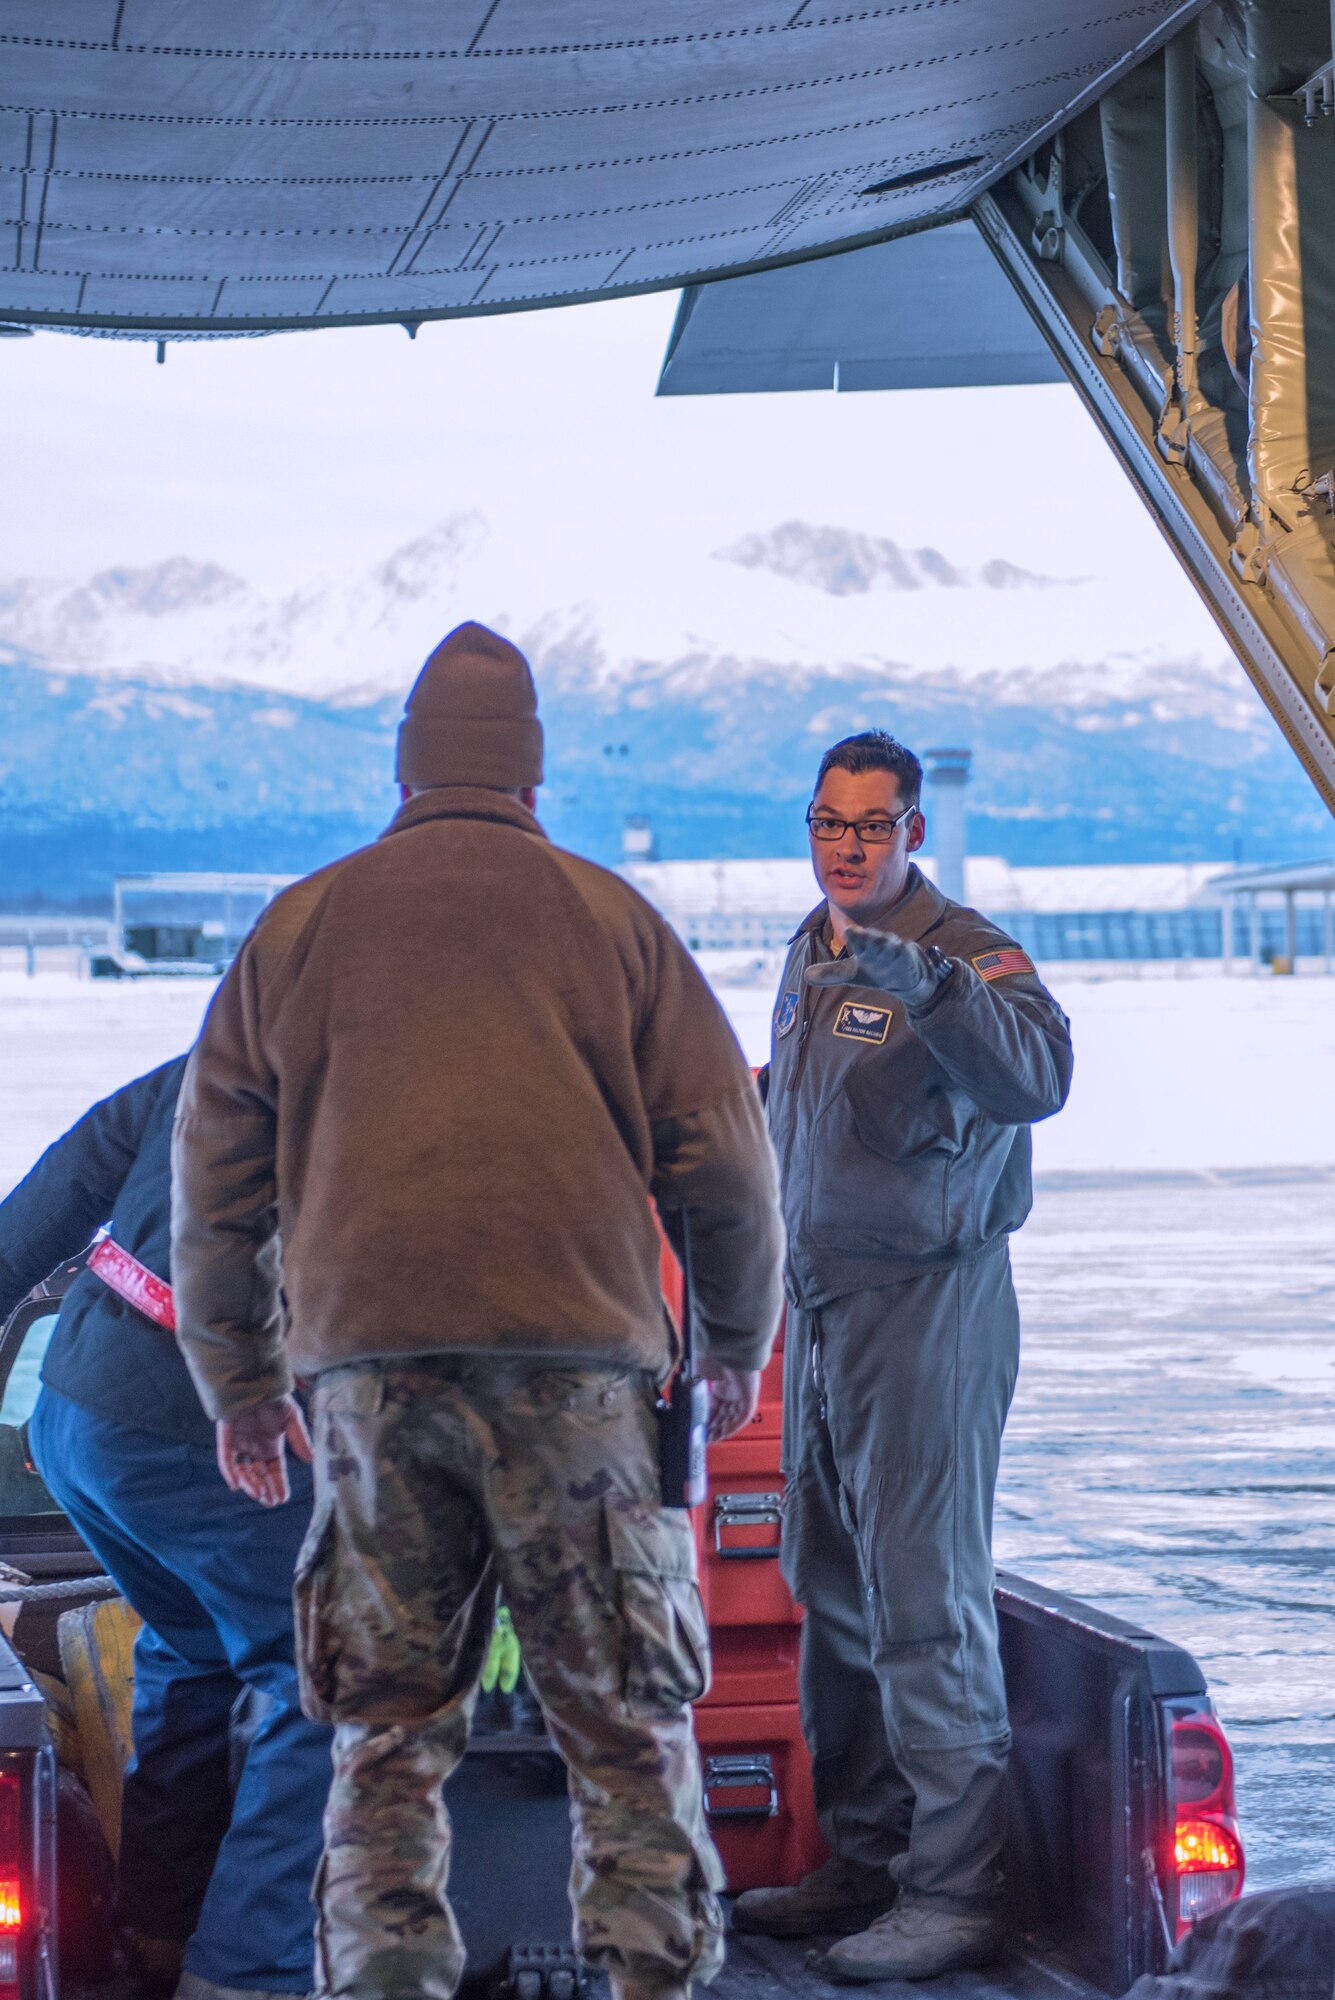 Senior Airman Dalton Galindo, a loadmaster with the 211th Rescue Squadron, directs cargo movement on a C-130J “Combat King II” at Joint Base Elmendorf-Richardson, Alaska, Nov. 30, 2018. In a matter of hours, members of the Alaska Air National Guard's Maintenance and Operation groups turned a planned community engagement into an aerial survey of earthquake damage in Southcentral Alaska, reporting findings to the State of Alaska's Joint Operations Center.